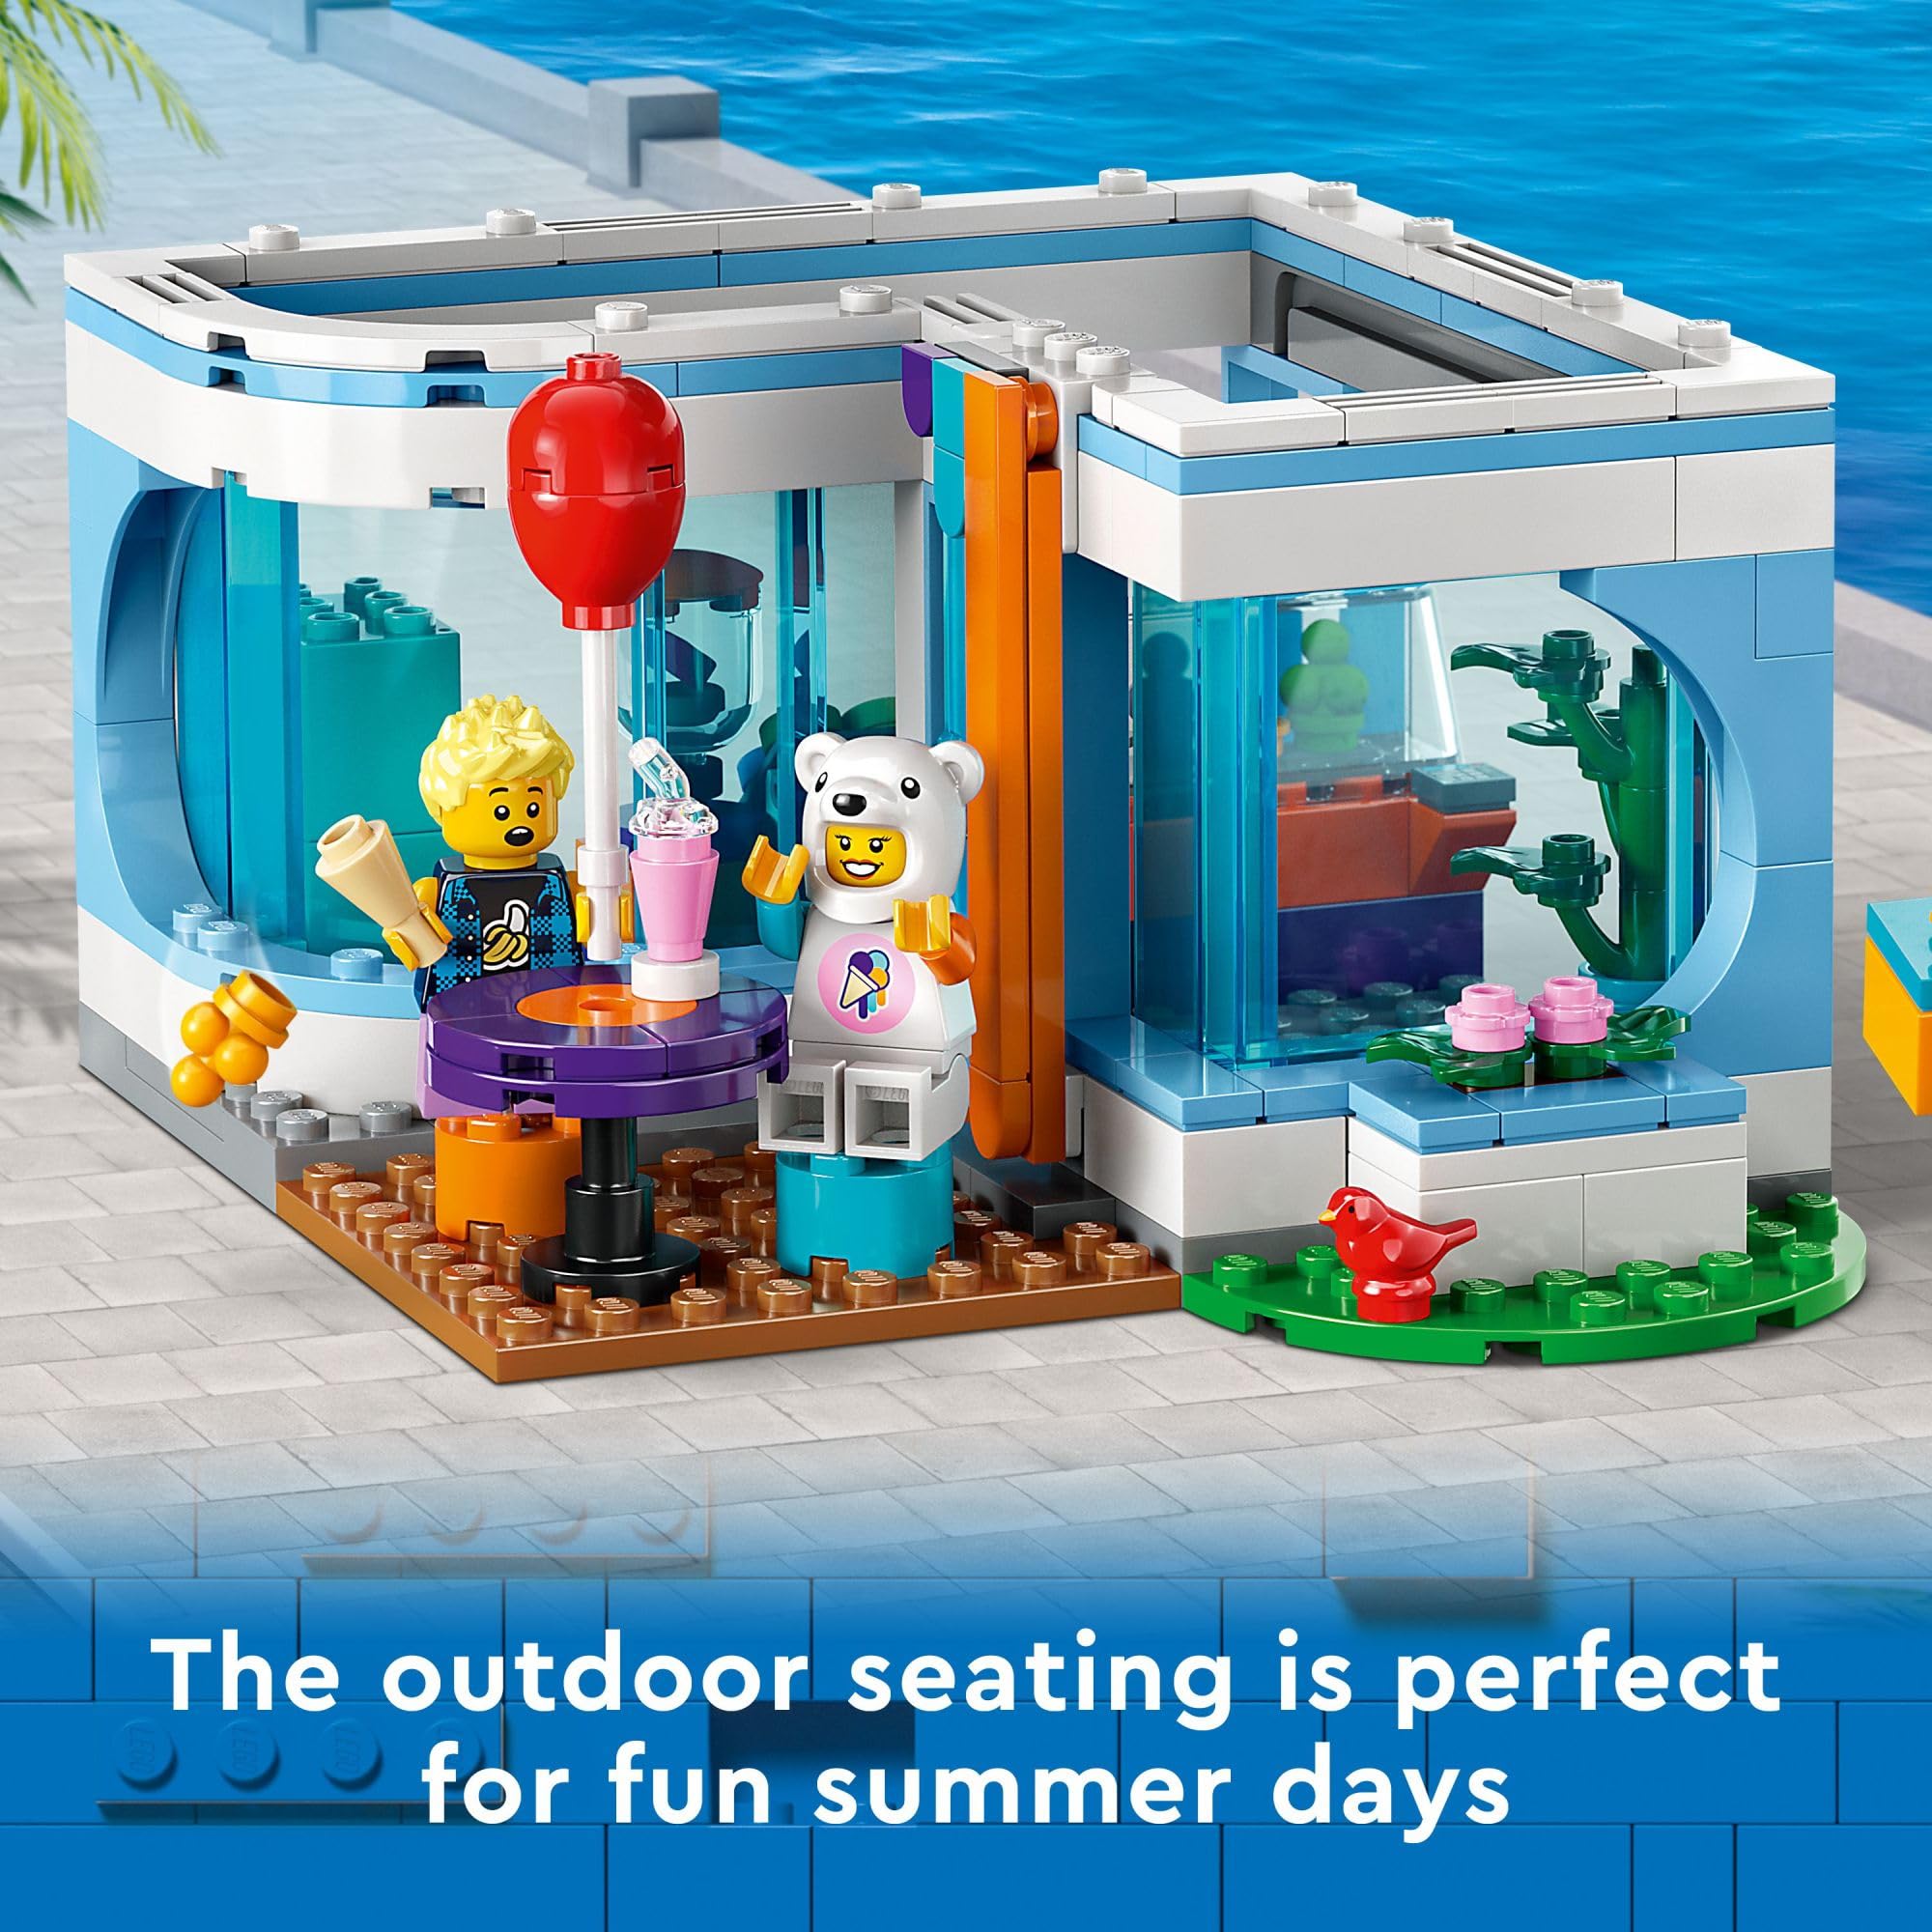 LEGO City Ice-Cream Shop 60363 Building Toy Set, Includes a Cargo Bike, 3 Minifigures and Lots of Fun Features and Accessories for Imaginative Role Play, Great Birthday Gift Idea for Kids